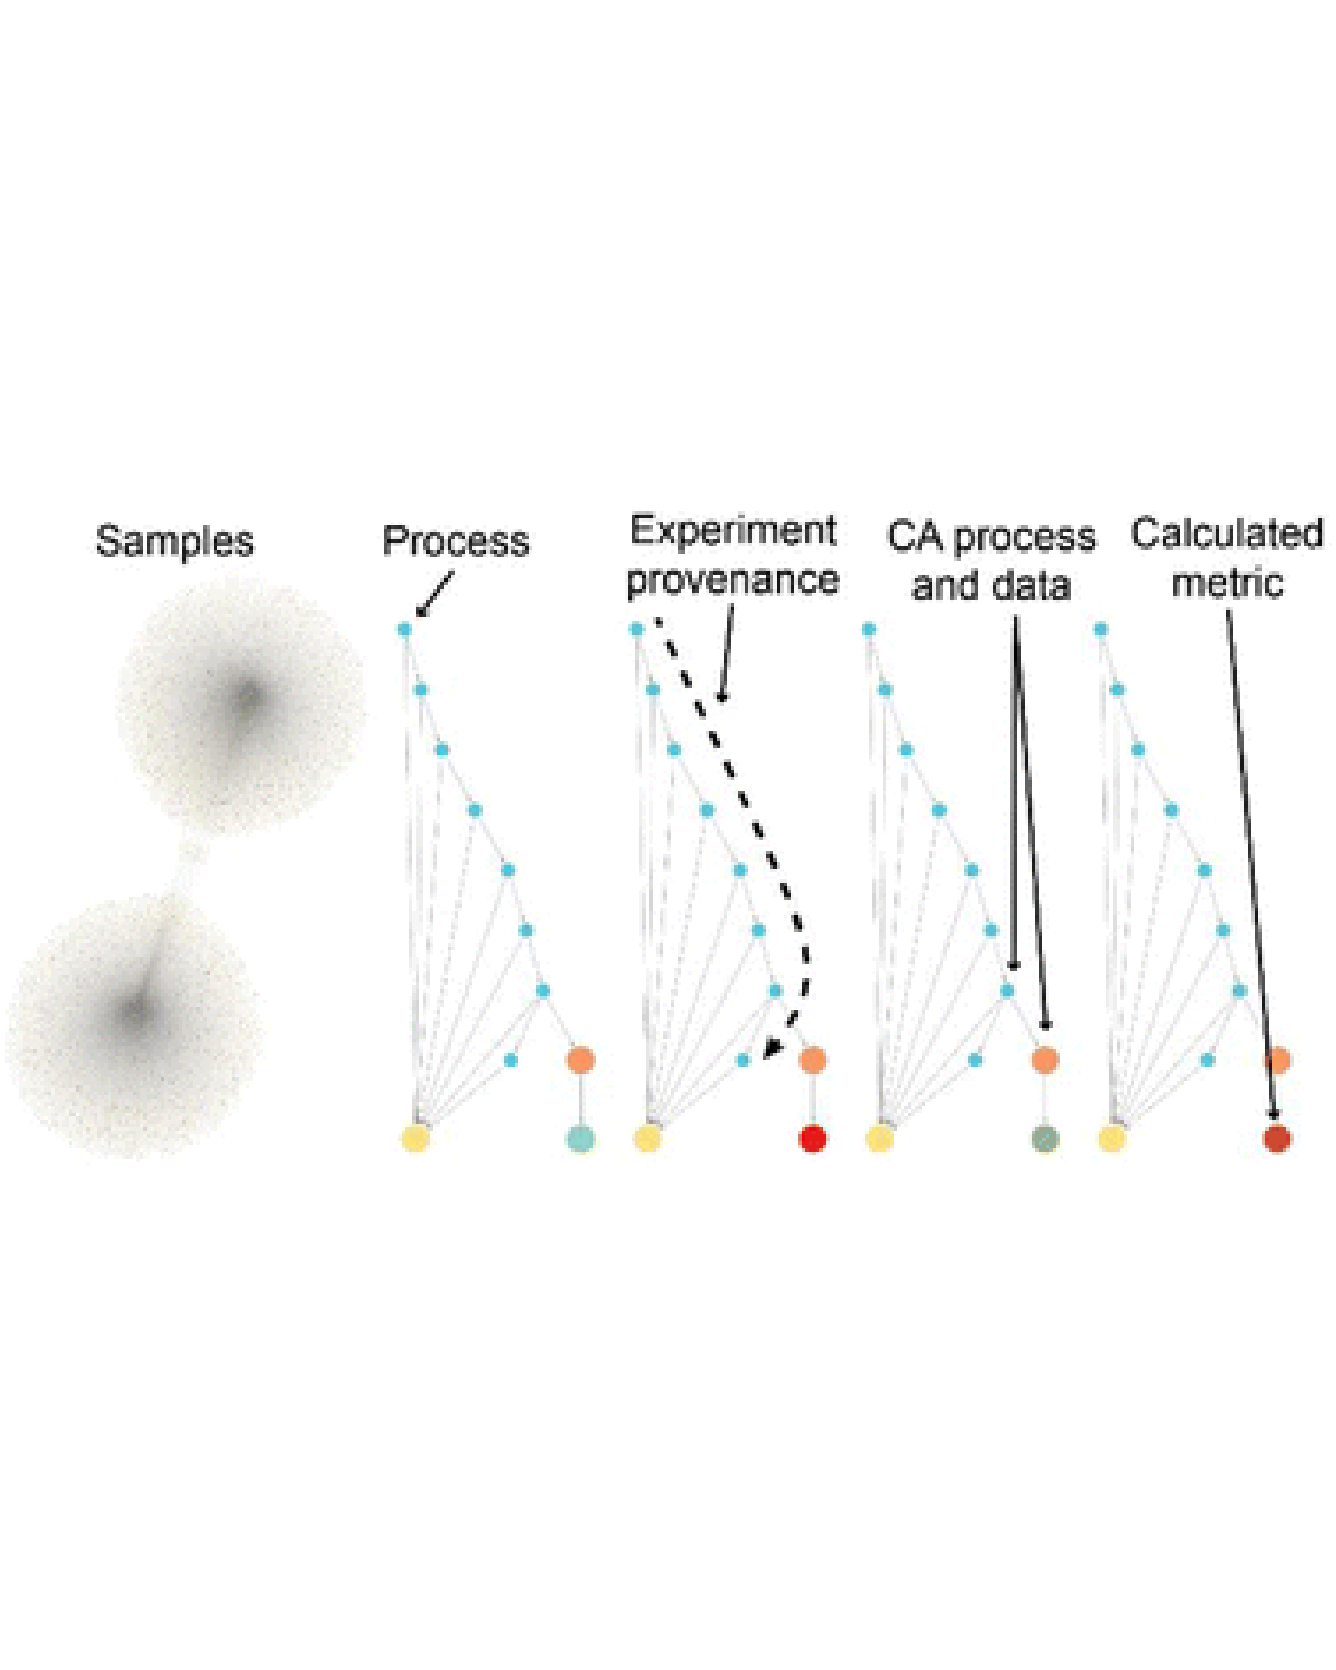 image from materials experiment knowledge graph article